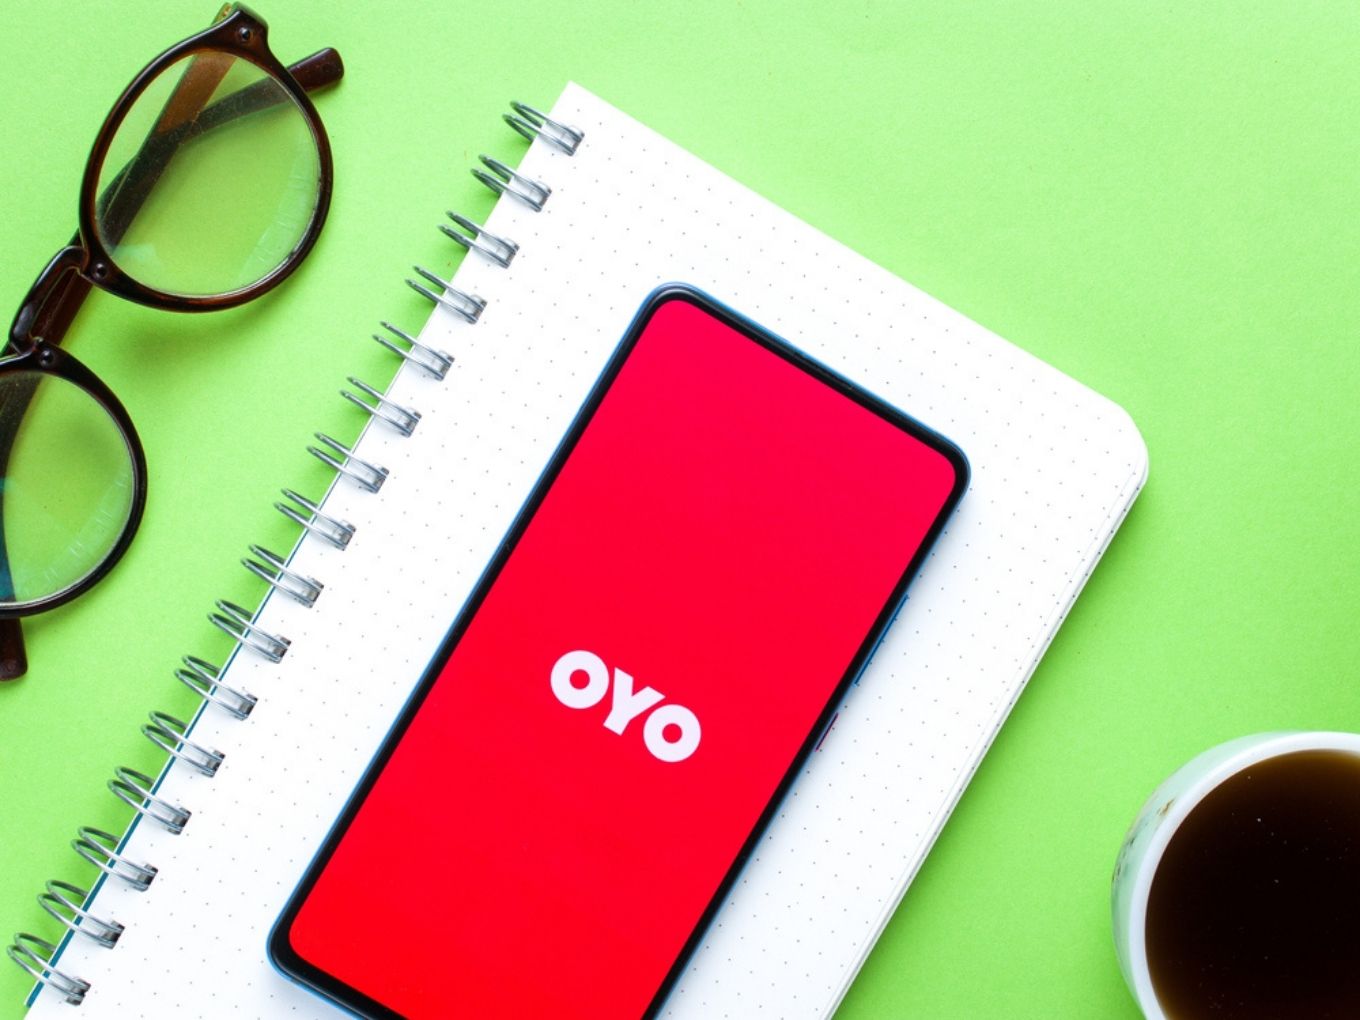 Exclusive: OYO $807 Mn Fundraise, Reduces Lightspeed & Sequoia To One Board Seat